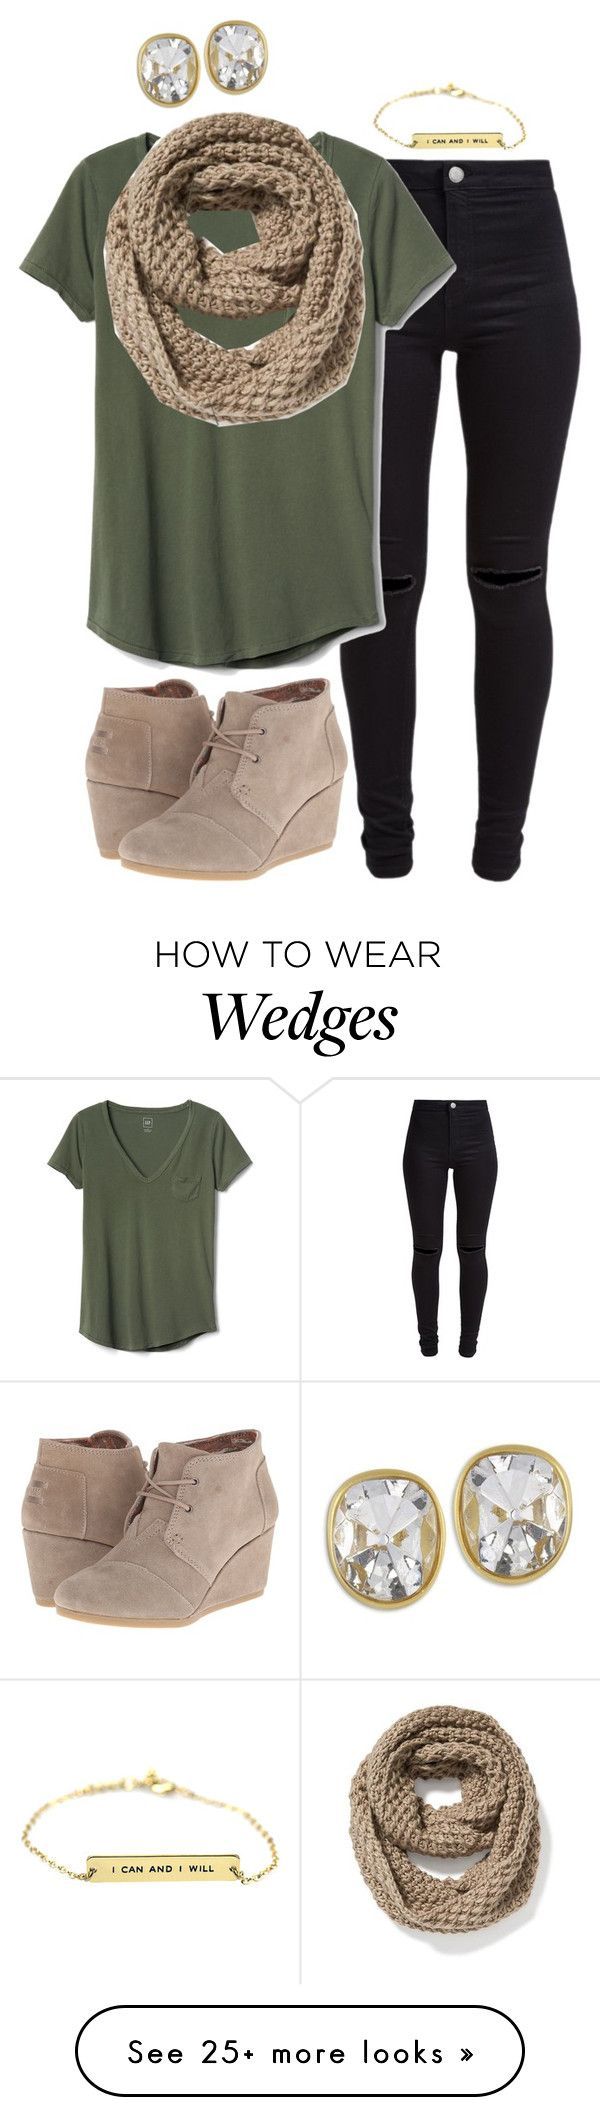 “Untitled #769” by lsteckbauer on Polyvore featuring New Look, Gap, Old Navy, TOMS and Kenneth Jay Lane